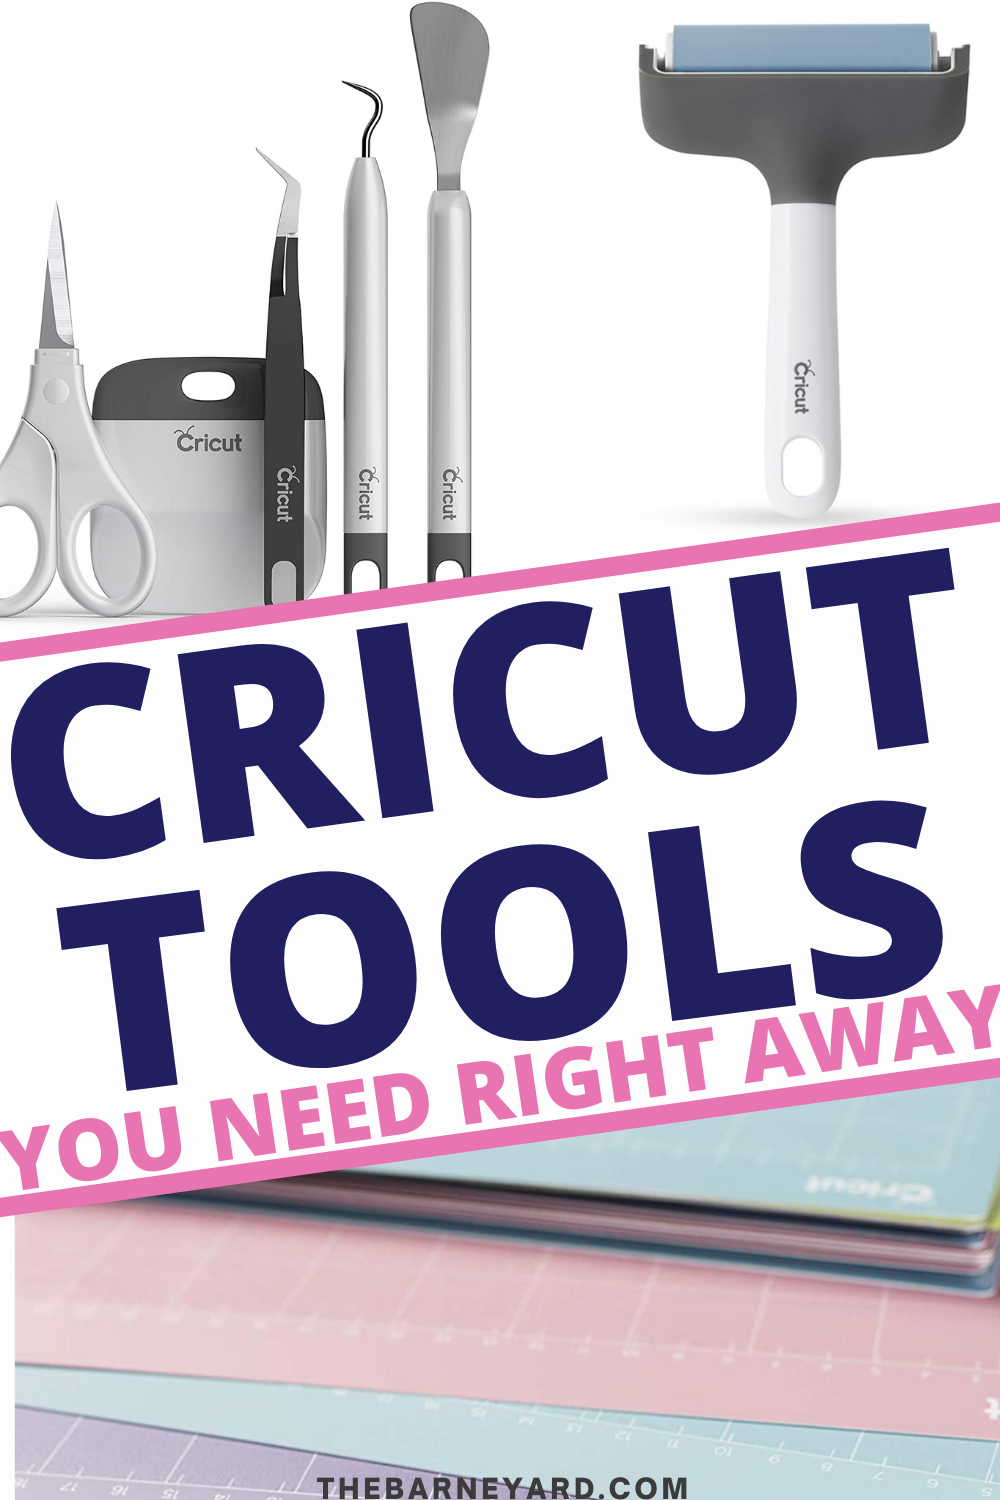 Cricut accessories you need right away - The Barne Yard